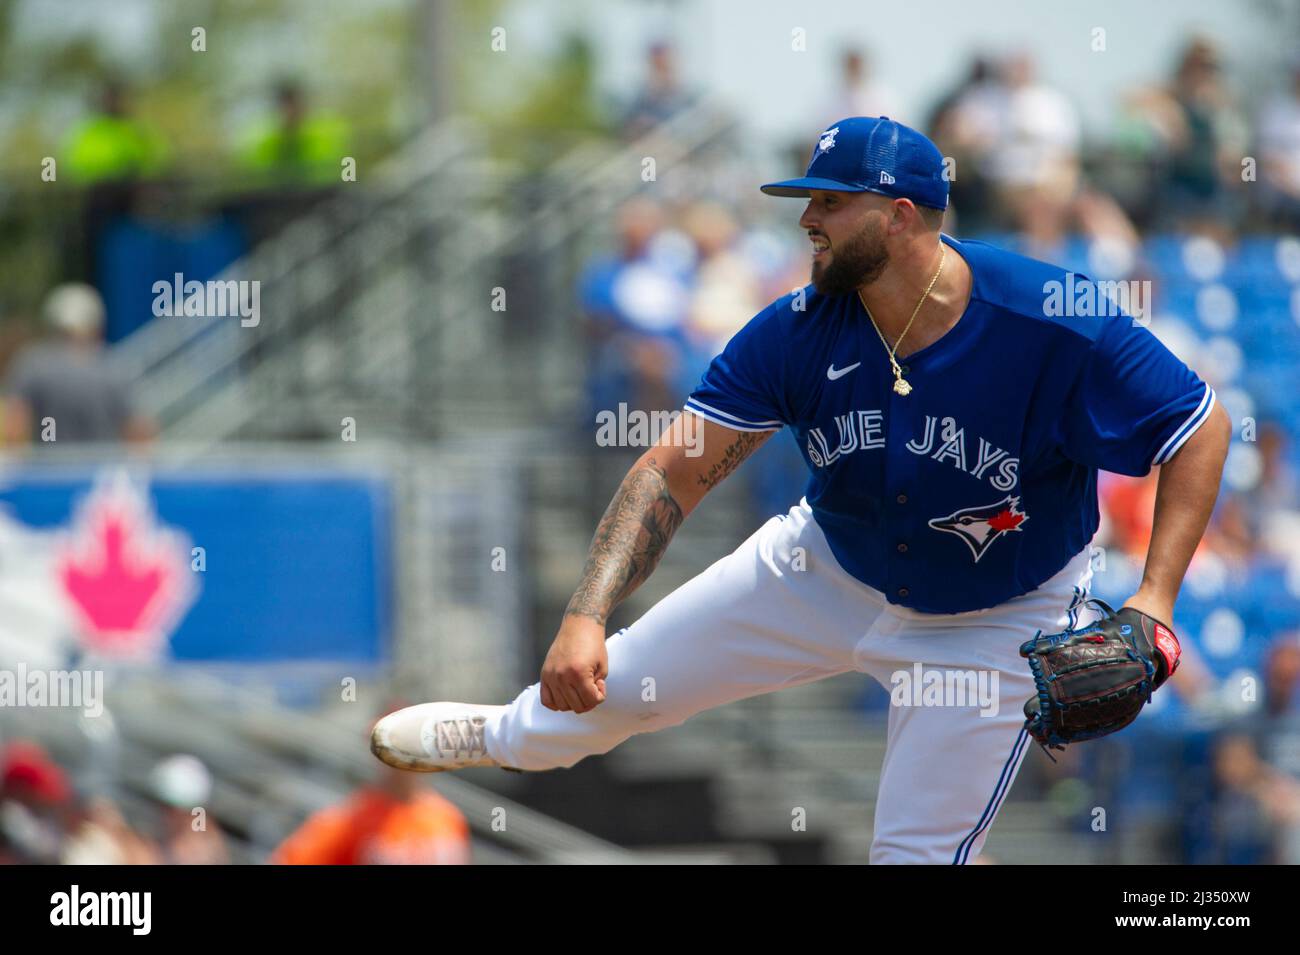 April 5, 2022, Dunedin, FL, The United States: Toronto Blue Jays pitcher Alek  Manoah delivers during a spring training game against the Baltimore Orioles  at TD Ballpark on Tuesday, April 5, 2022